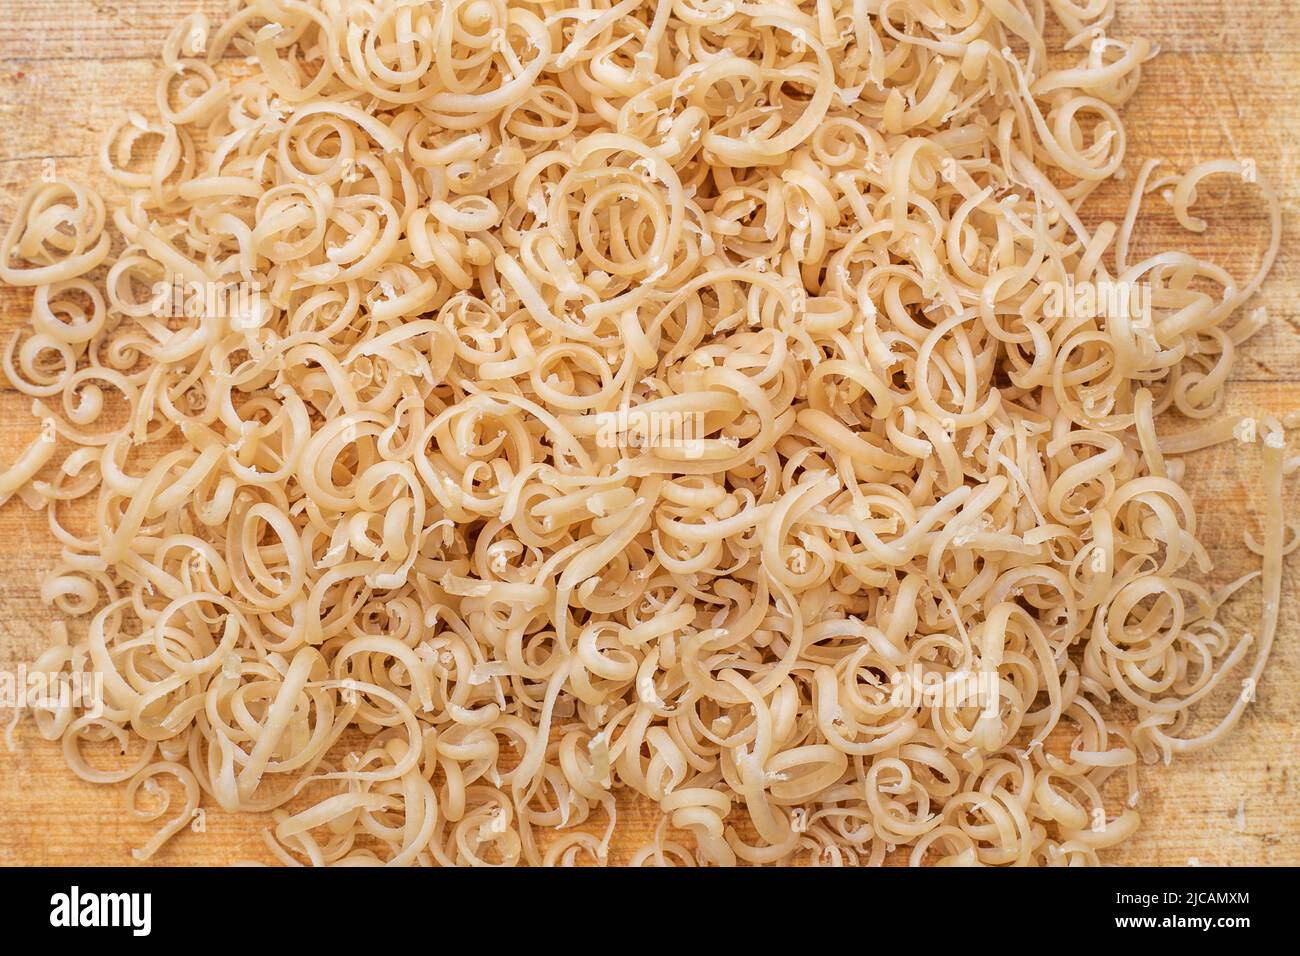 https://c8.alamy.com/comp/2JCAMXM/soap-shavings-on-a-wooden-board-small-spirals-of-grated-laundry-soap-2JCAMXM.jpg